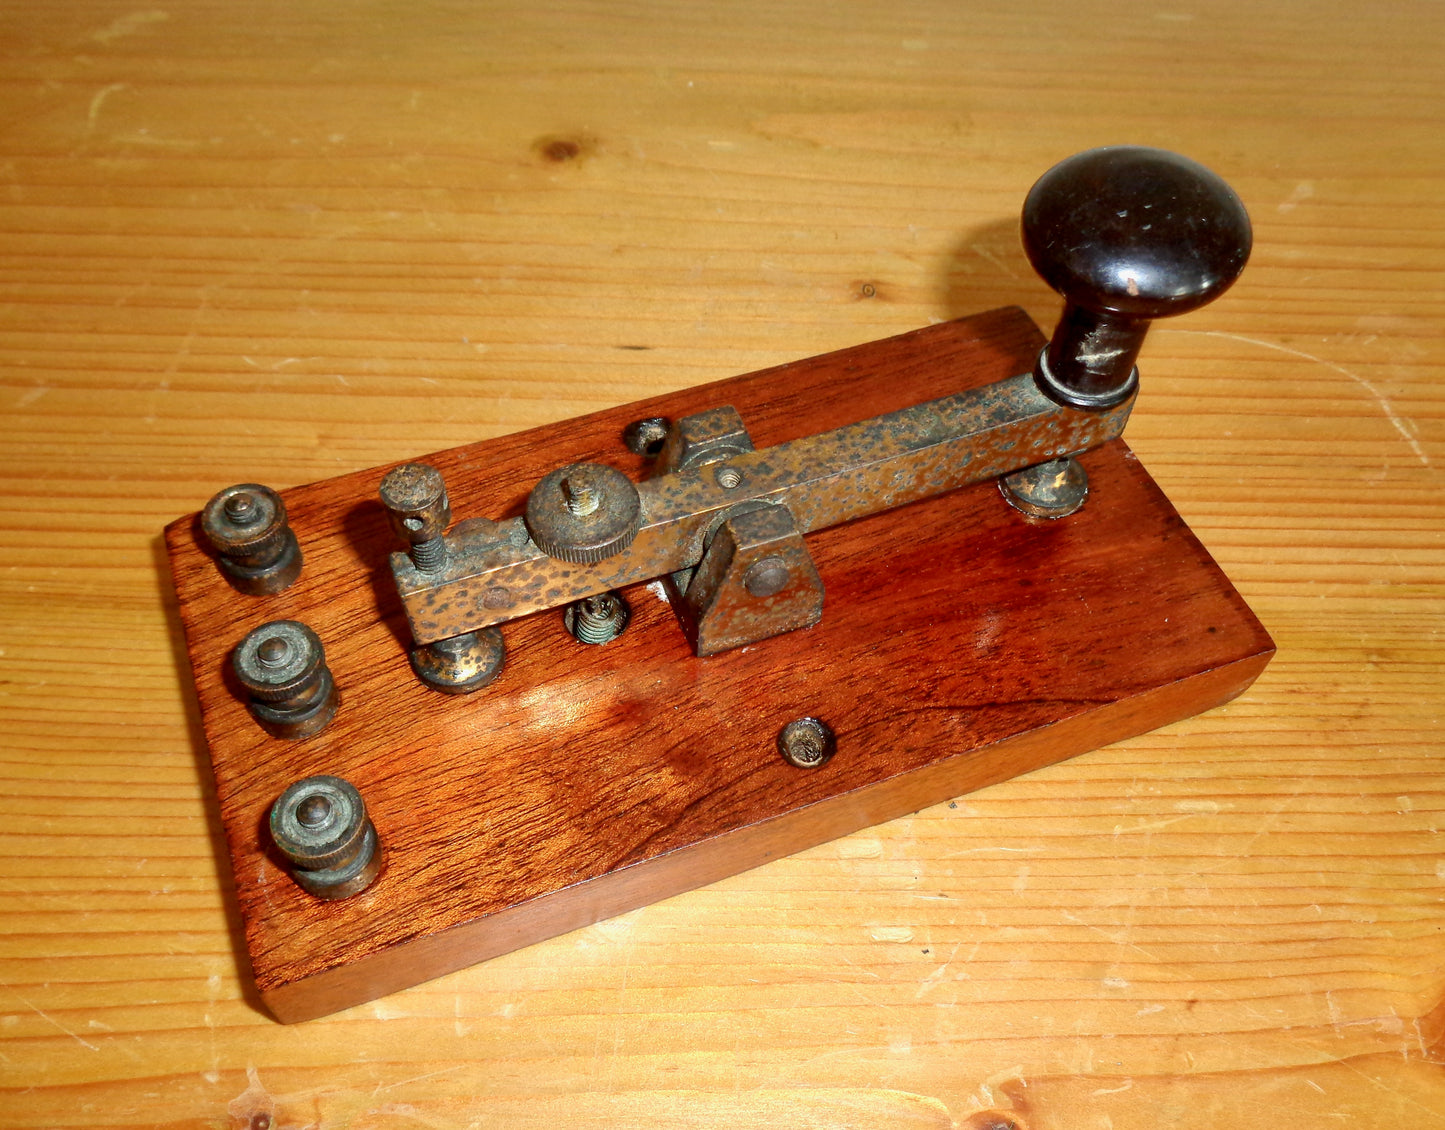 1920s British Straight Sending Morse Key Possibly Made By Franks